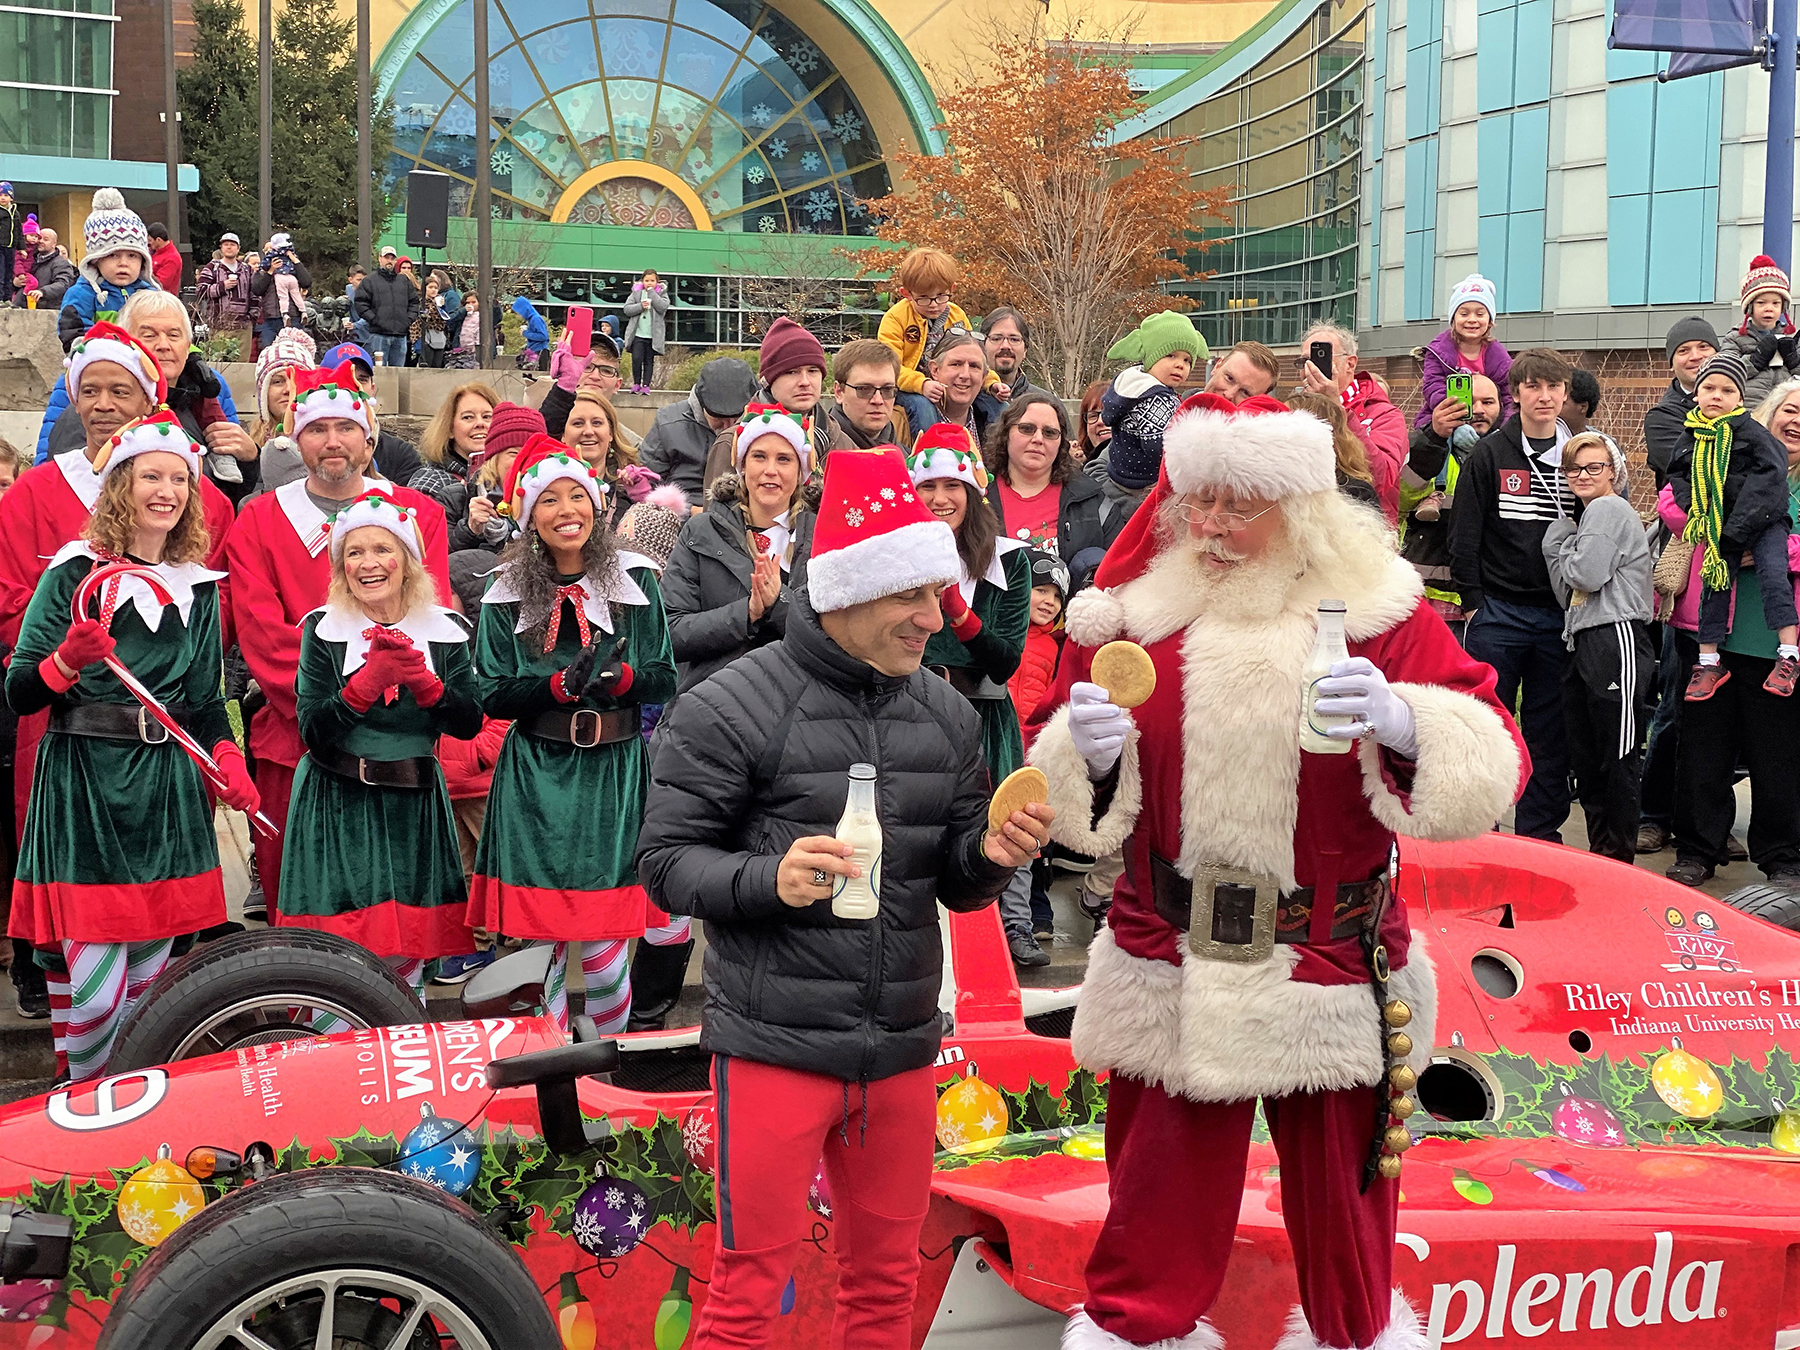 Santa shares his first cookies and milk with former Indy 500 winner Tony Kanaan.